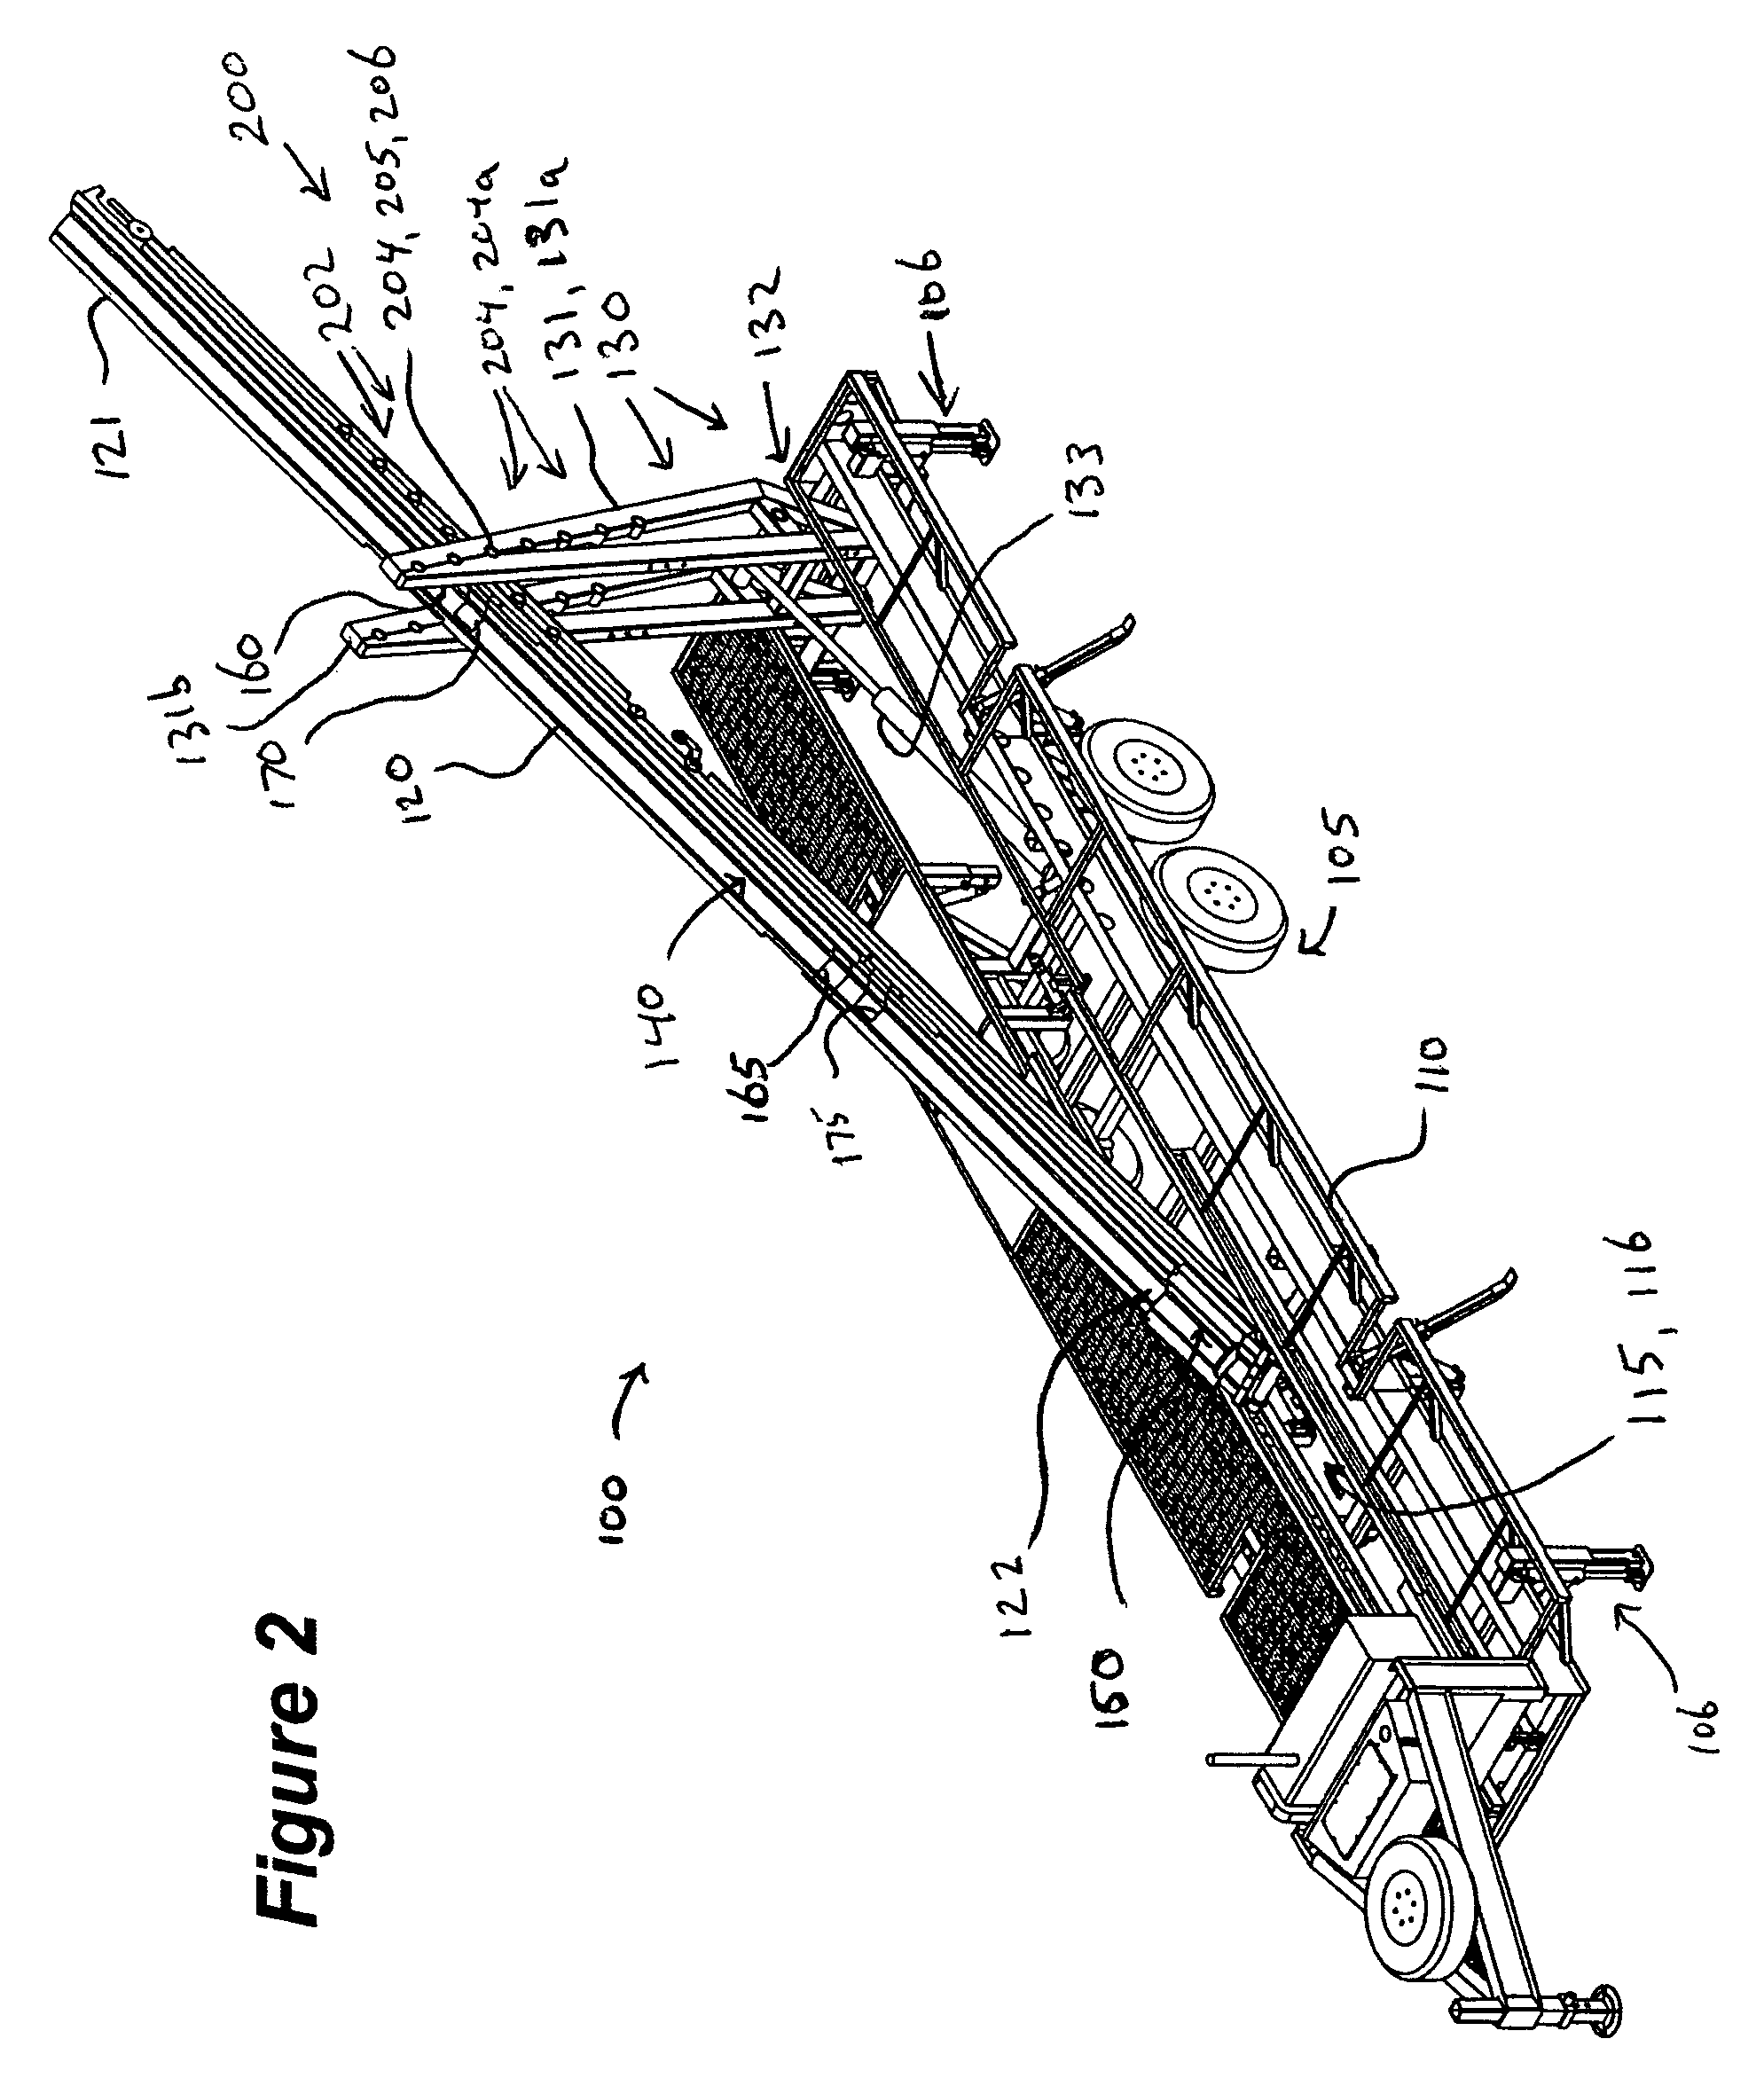 Multi-position height adjustment system for a pipe handling apparatus